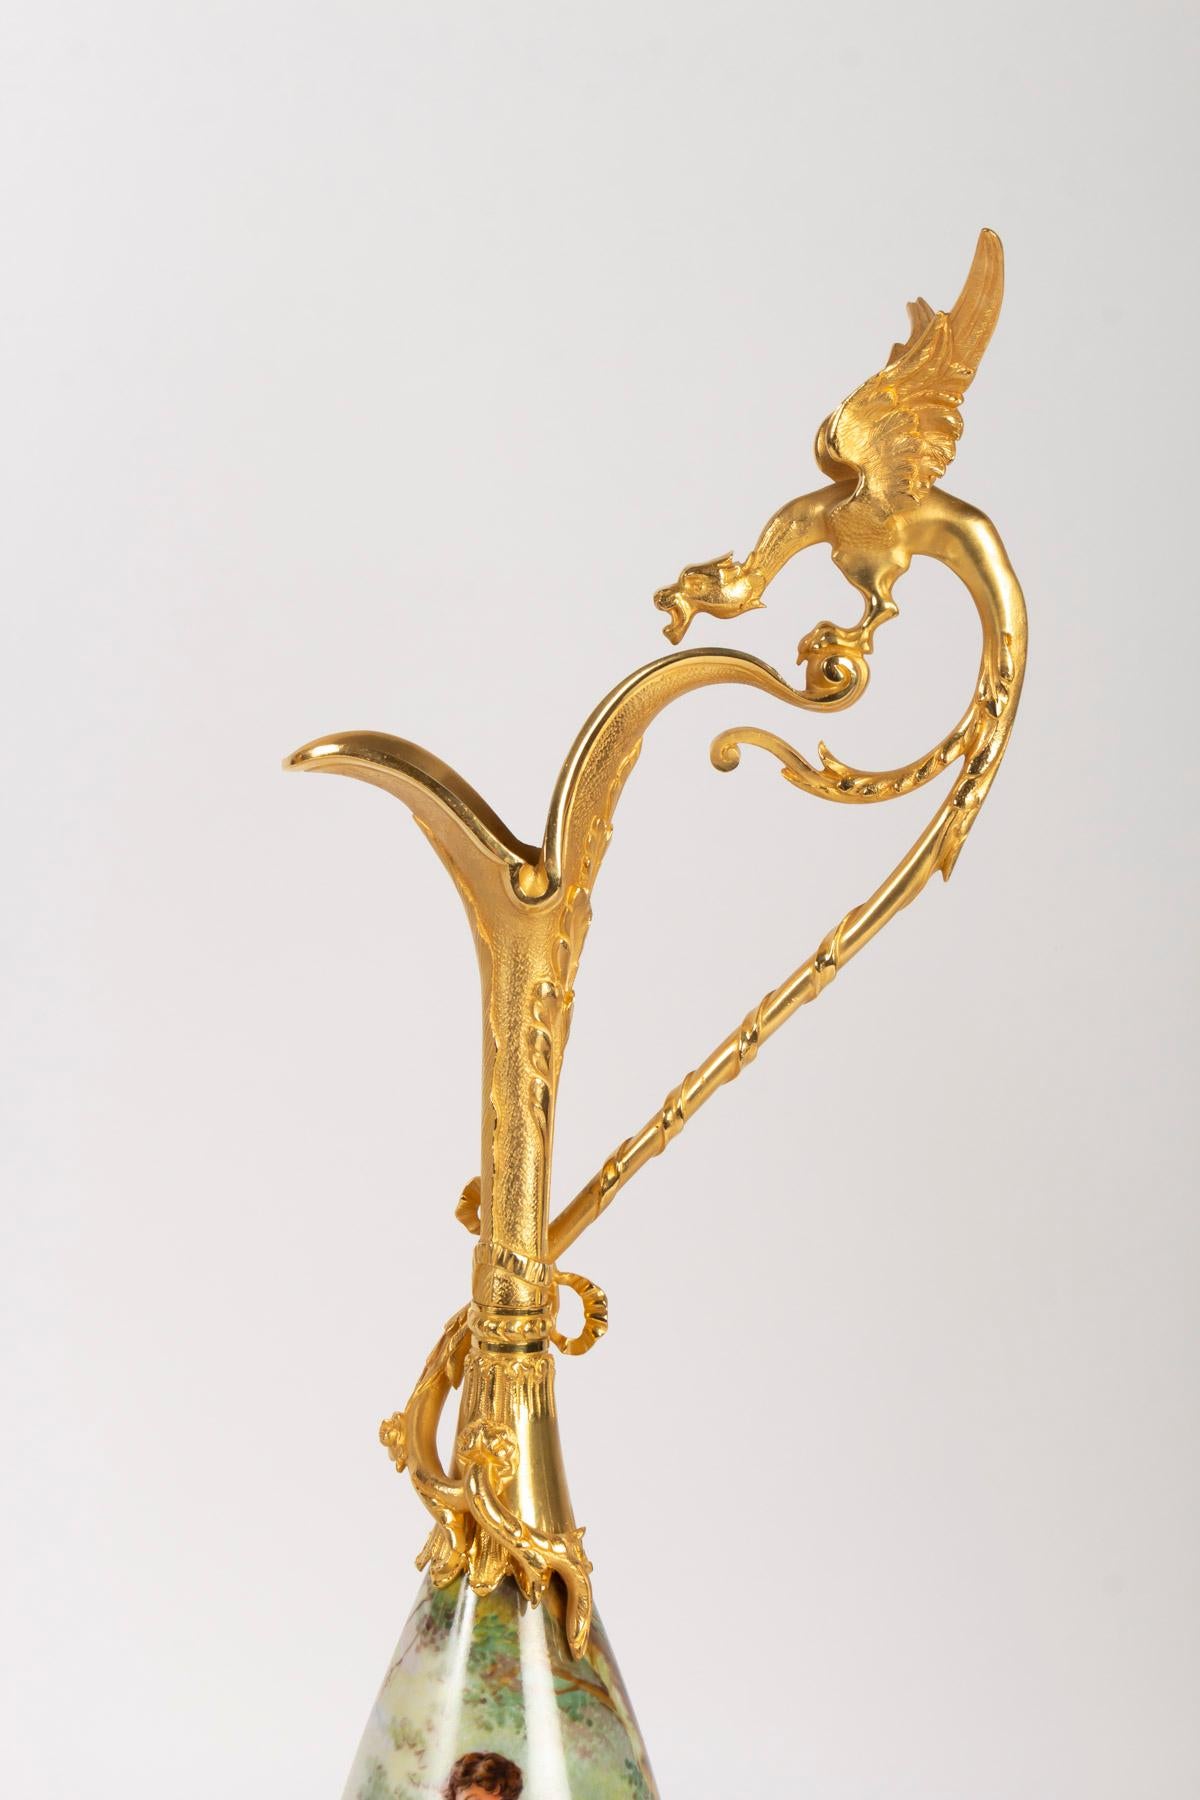 Pair of gilt bronze and porcelain ewers with a Winged Dragon, Napoleon III, hand painted scenes on porcelain in the taste of antiquity, 1880
Measures: H 64 cm, W 23 cm, D 15 cm.